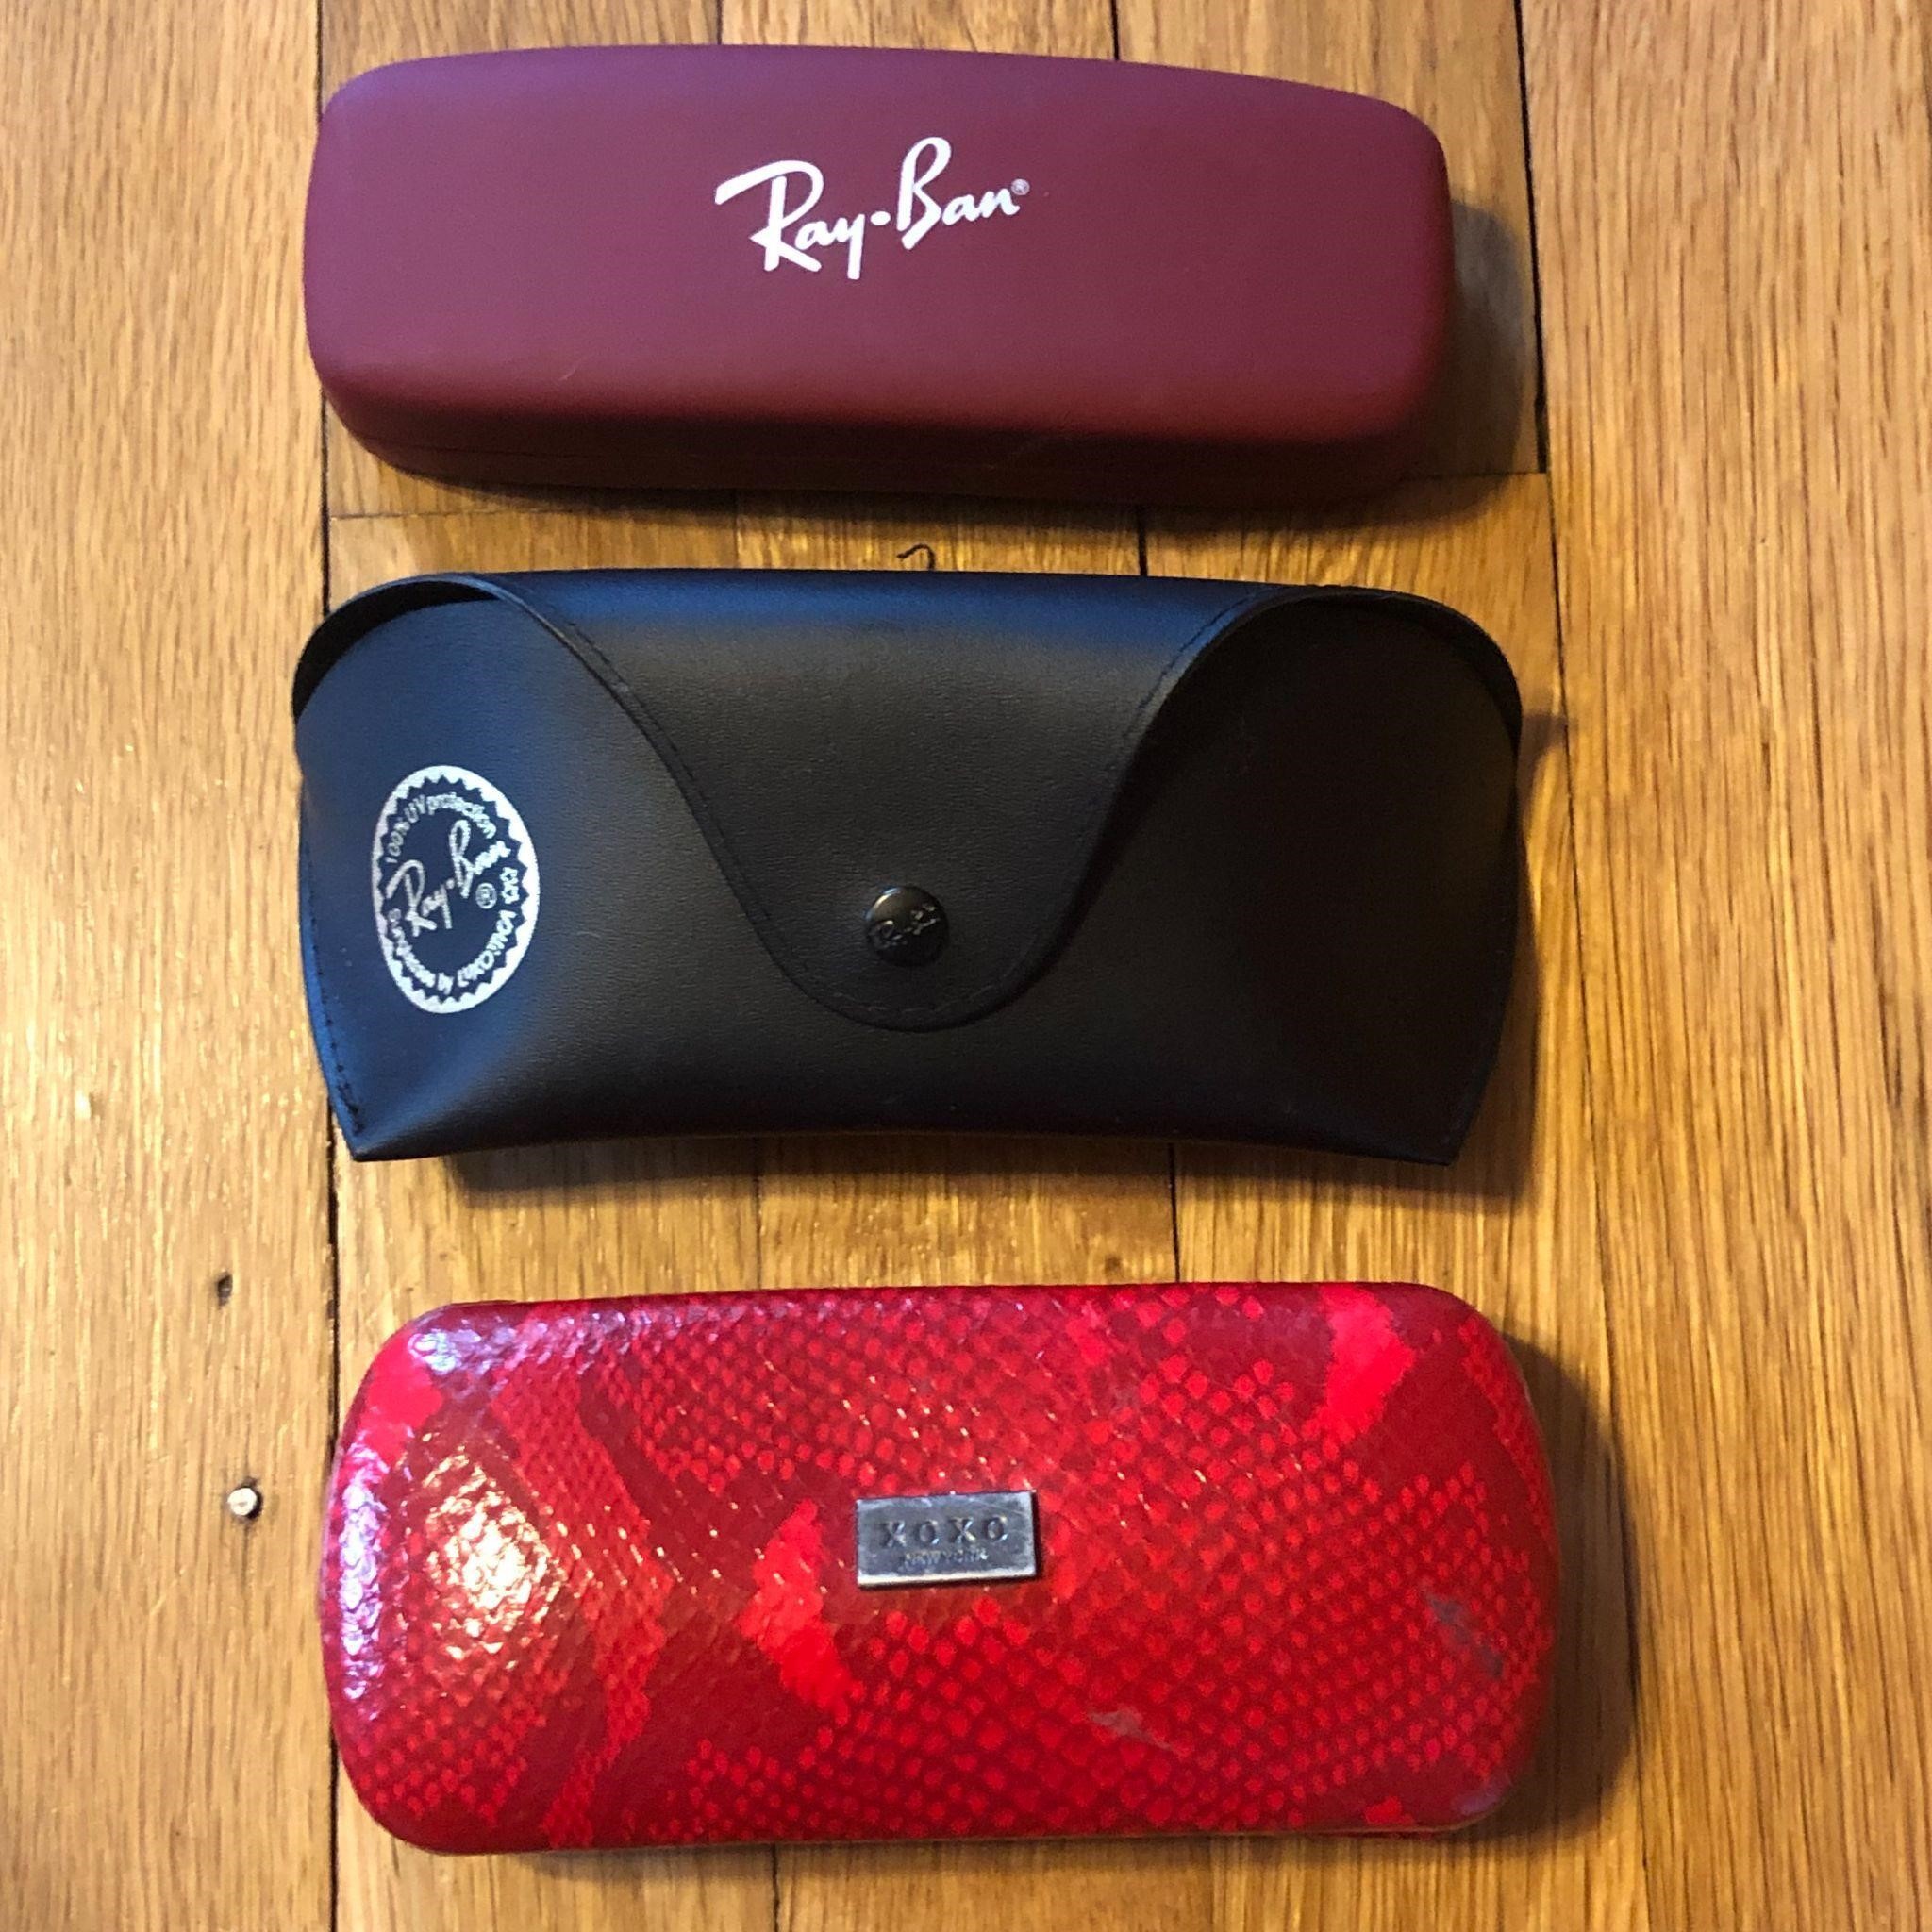 Lot with Ray Ban Sunglasses - Cases Only